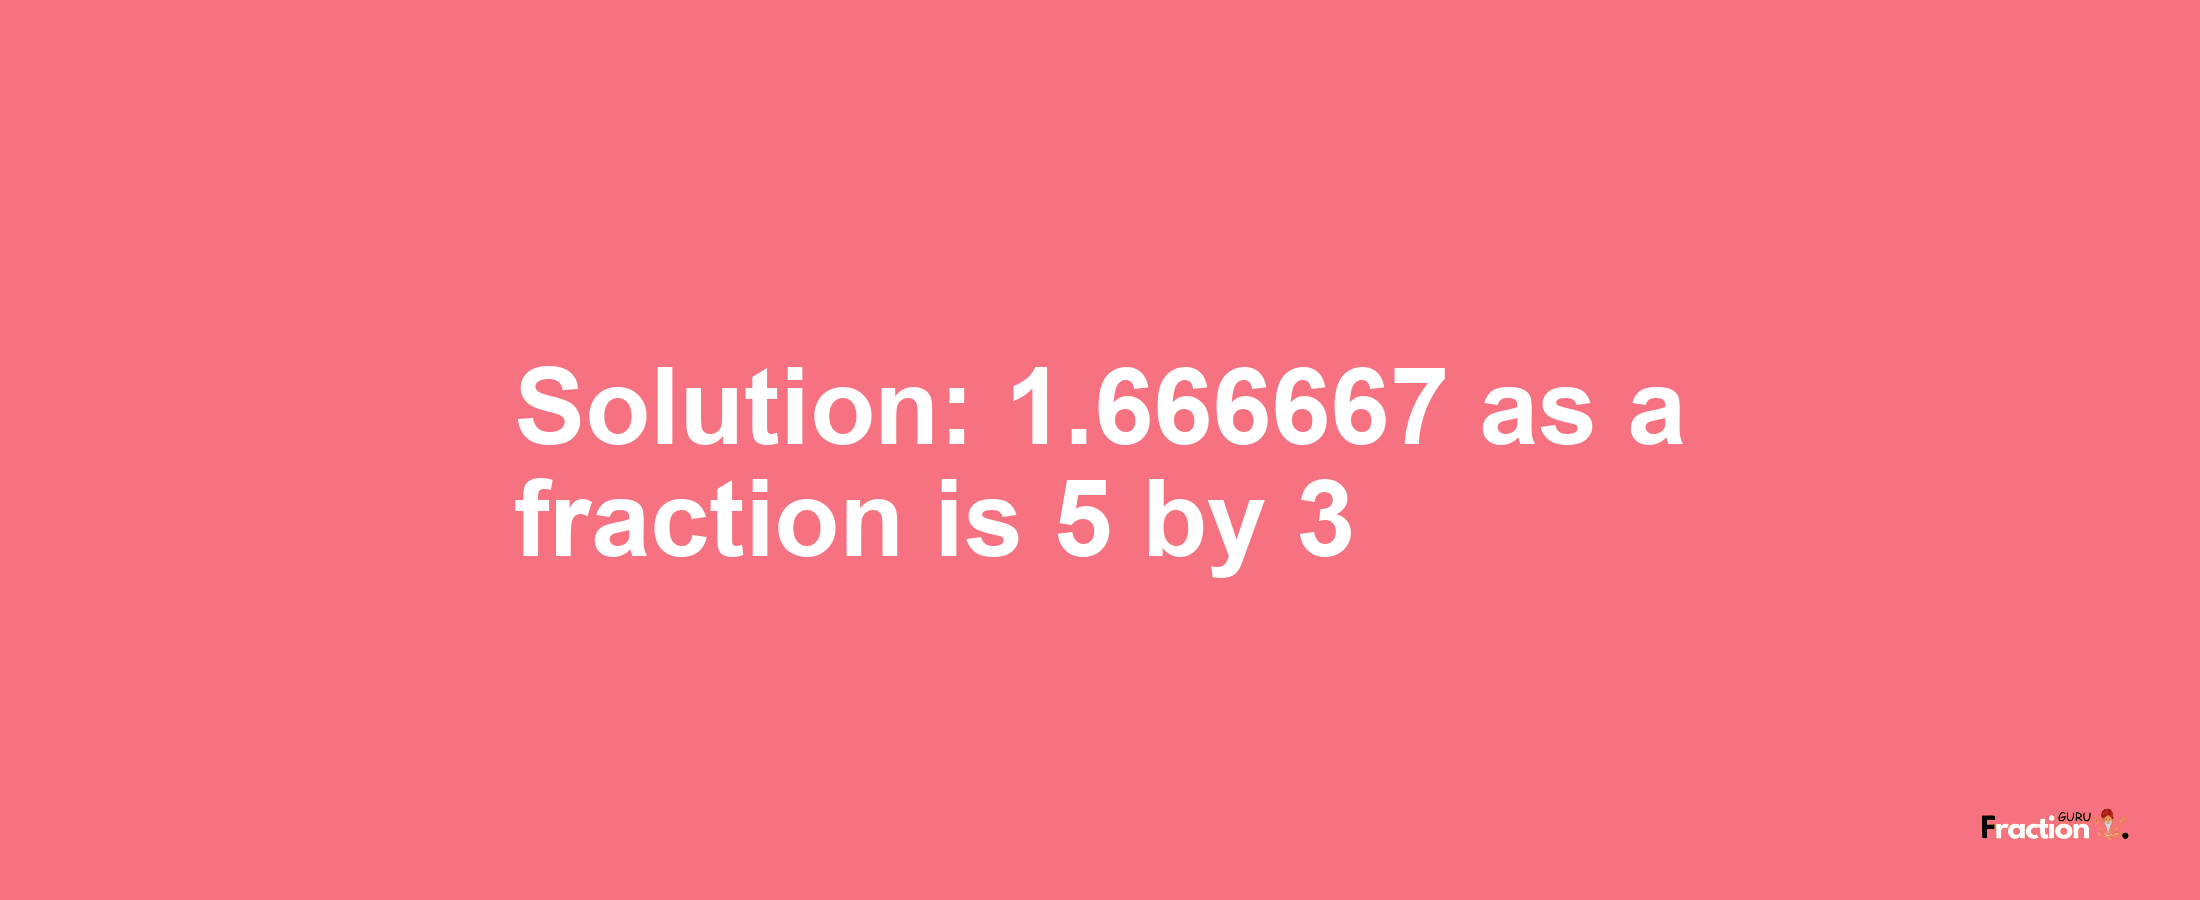 Solution:1.666667 as a fraction is 5/3